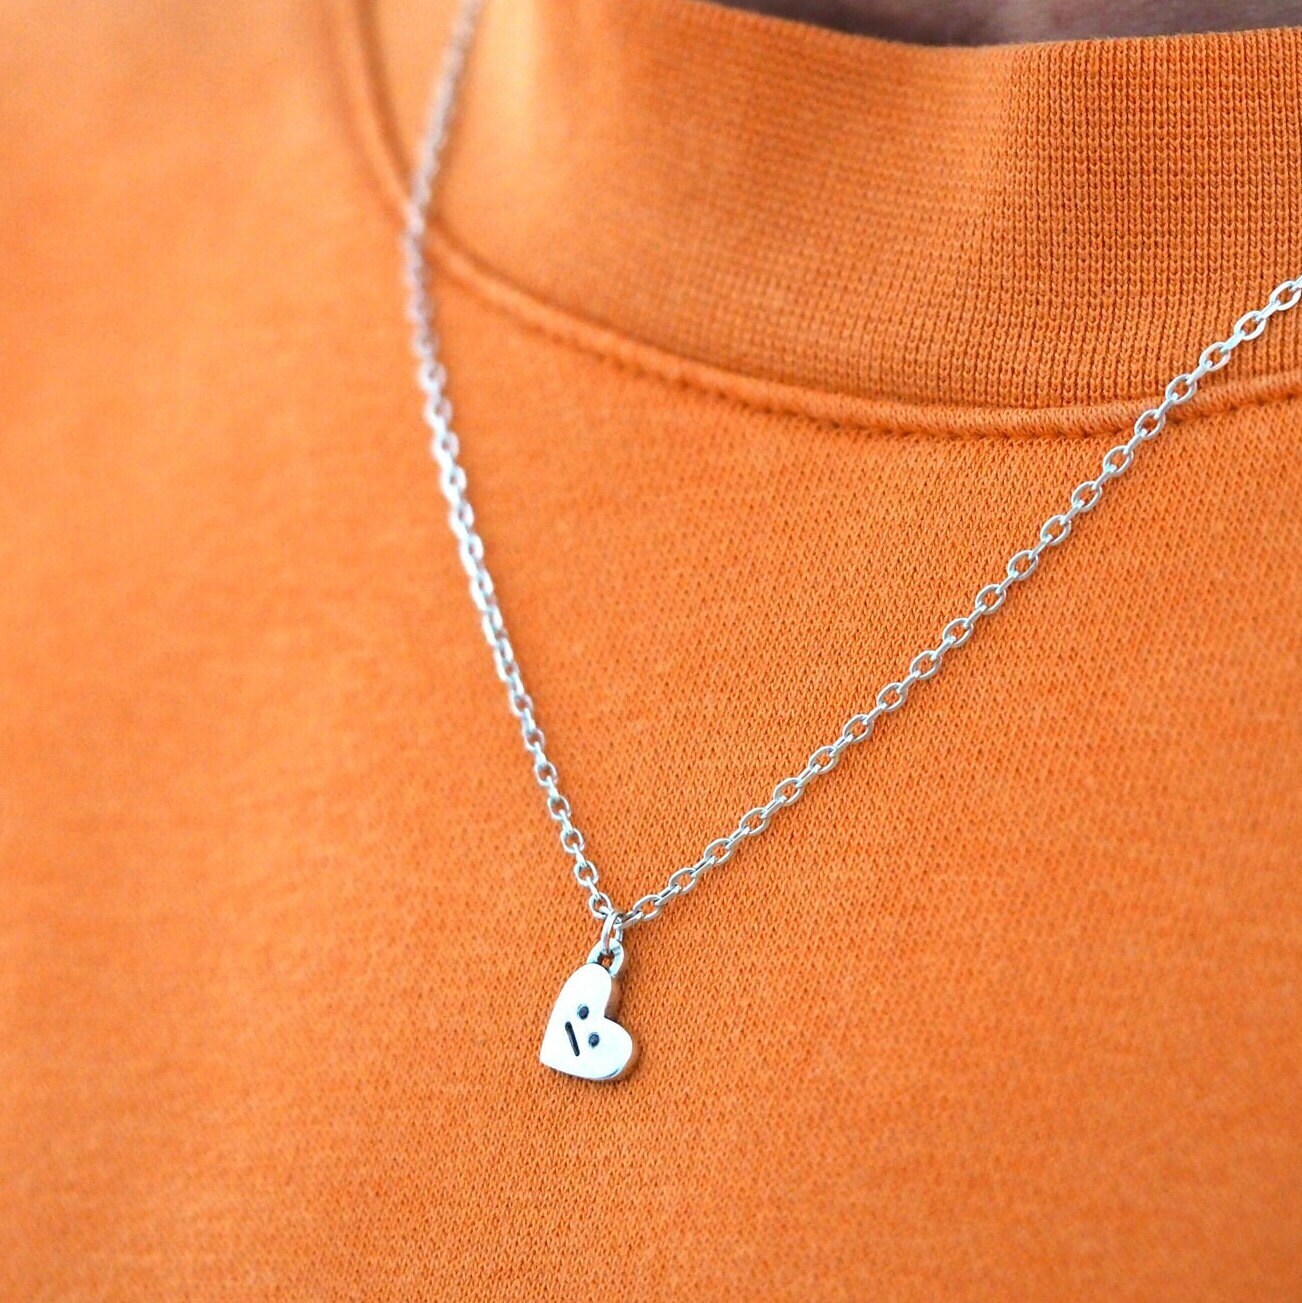 Grumpy Heart Necklace - Sterling Silver and Black Diamonds